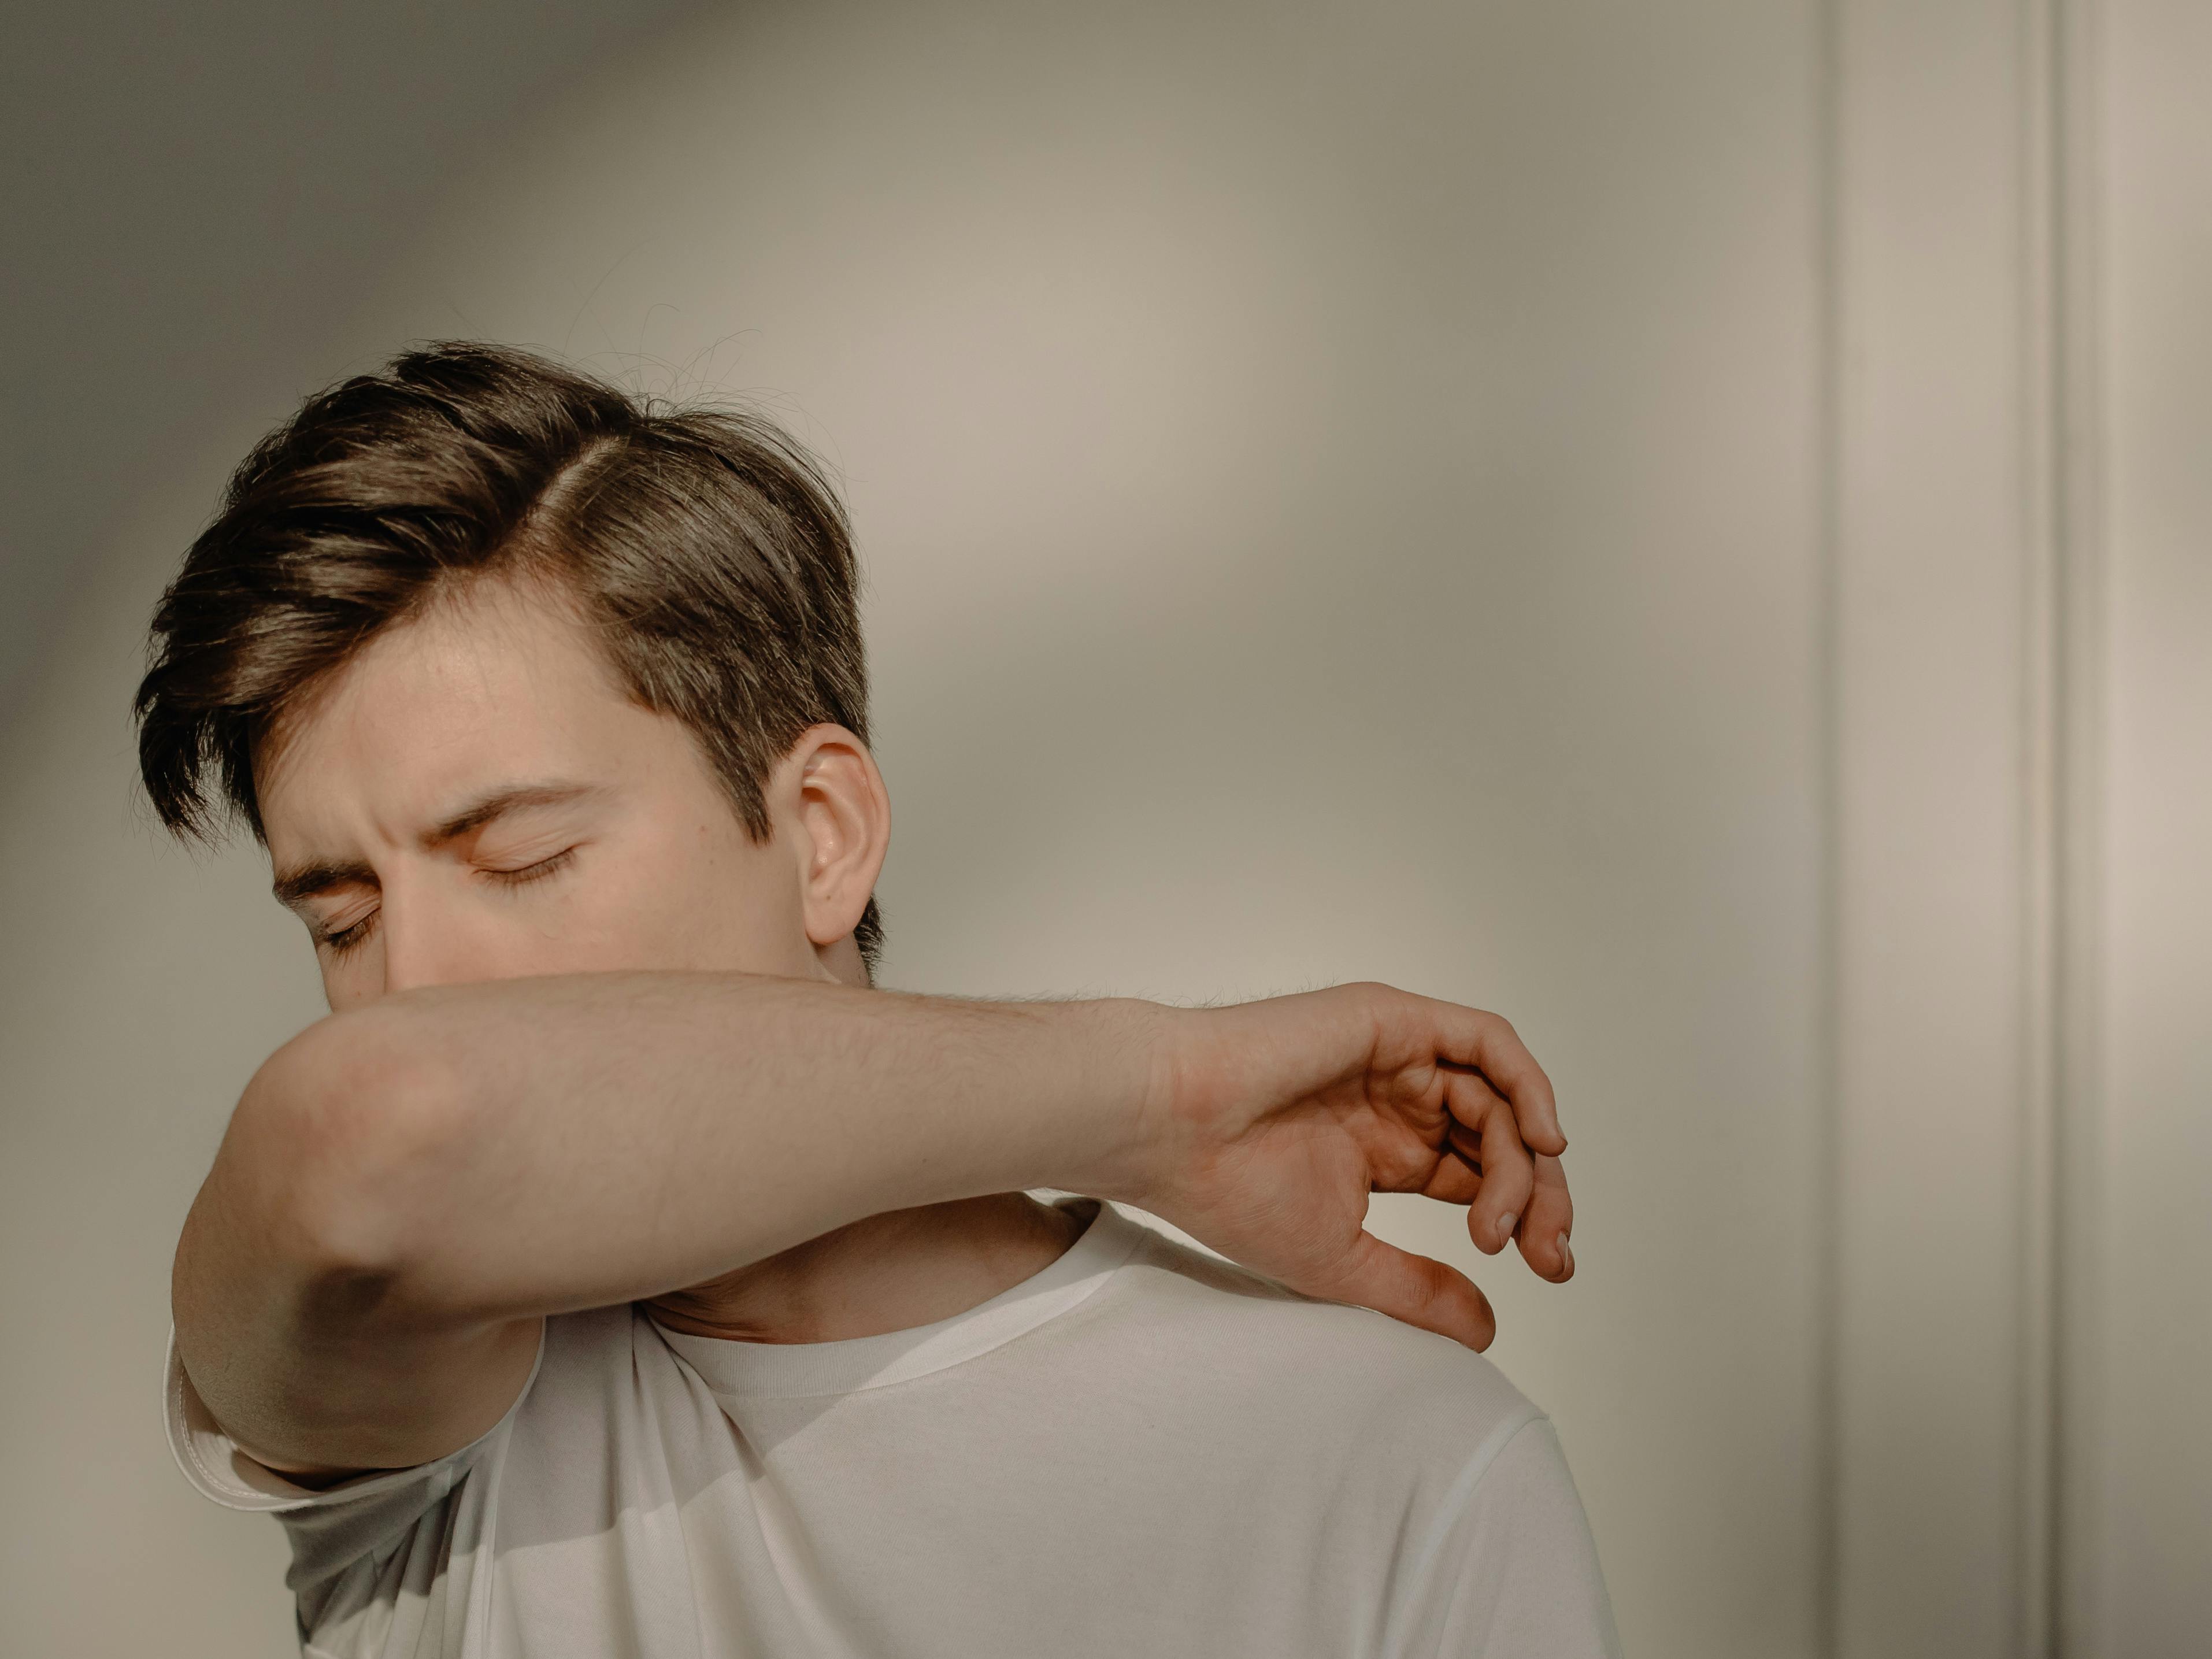 A man coughing | Source: Pexels